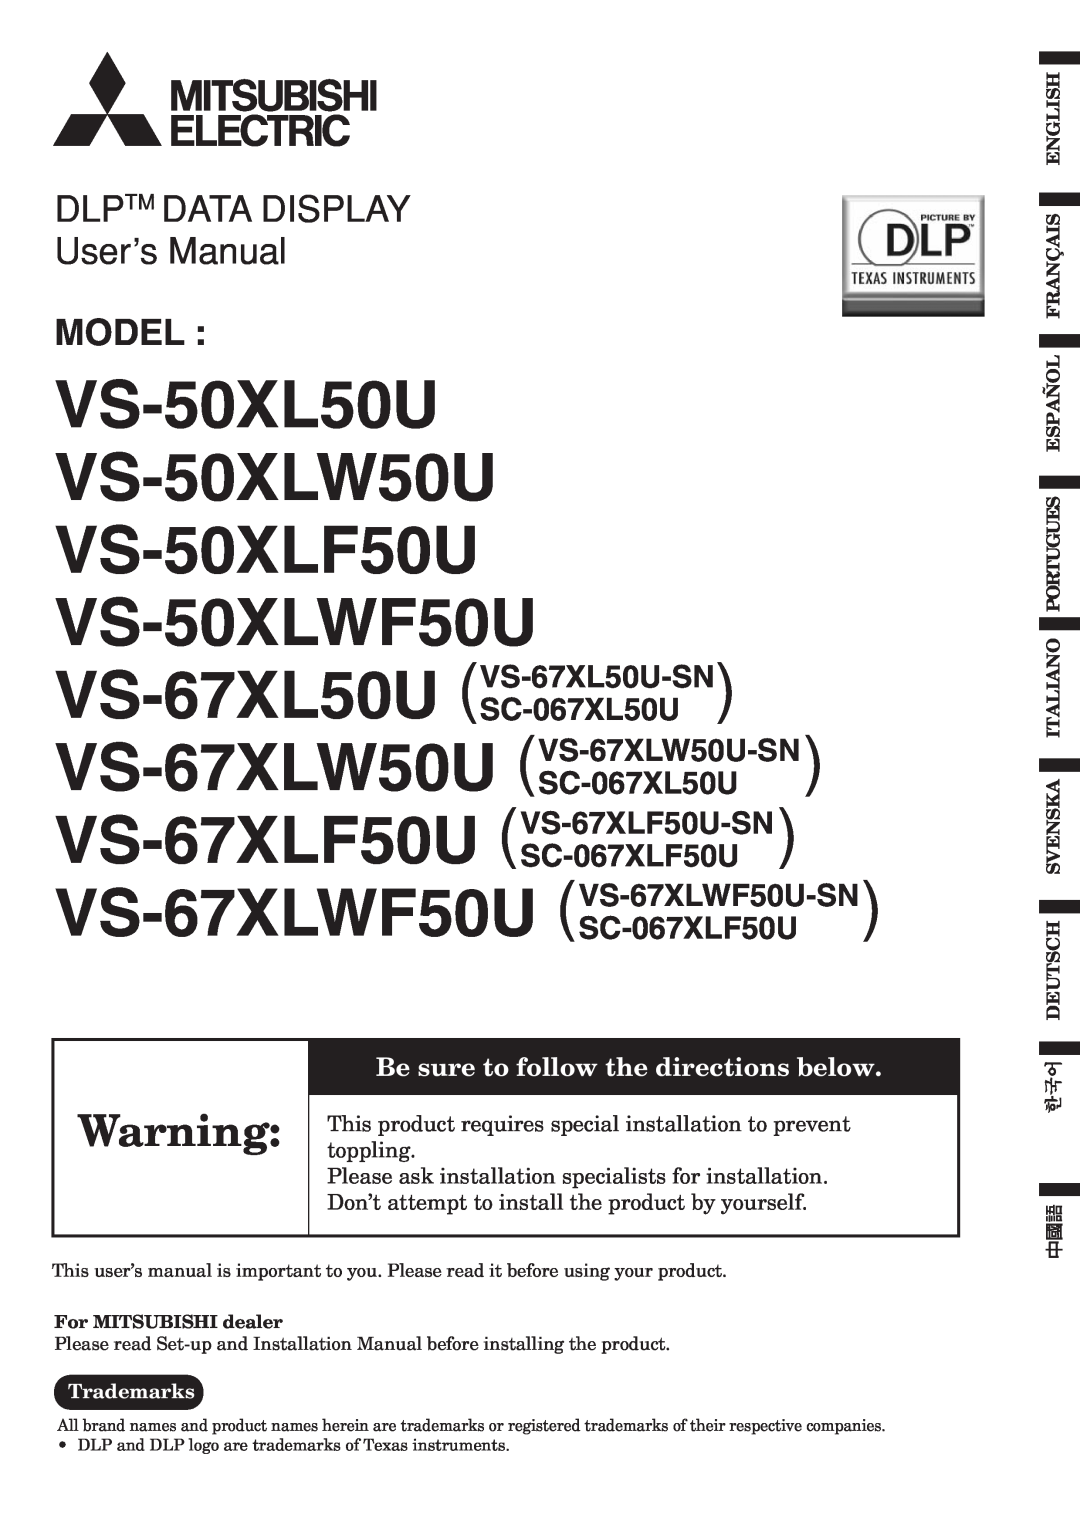 Mitsubishi Electronics VS-50XL50U user manual toppling, This product requires special installation to prevent, EN-1, Model 